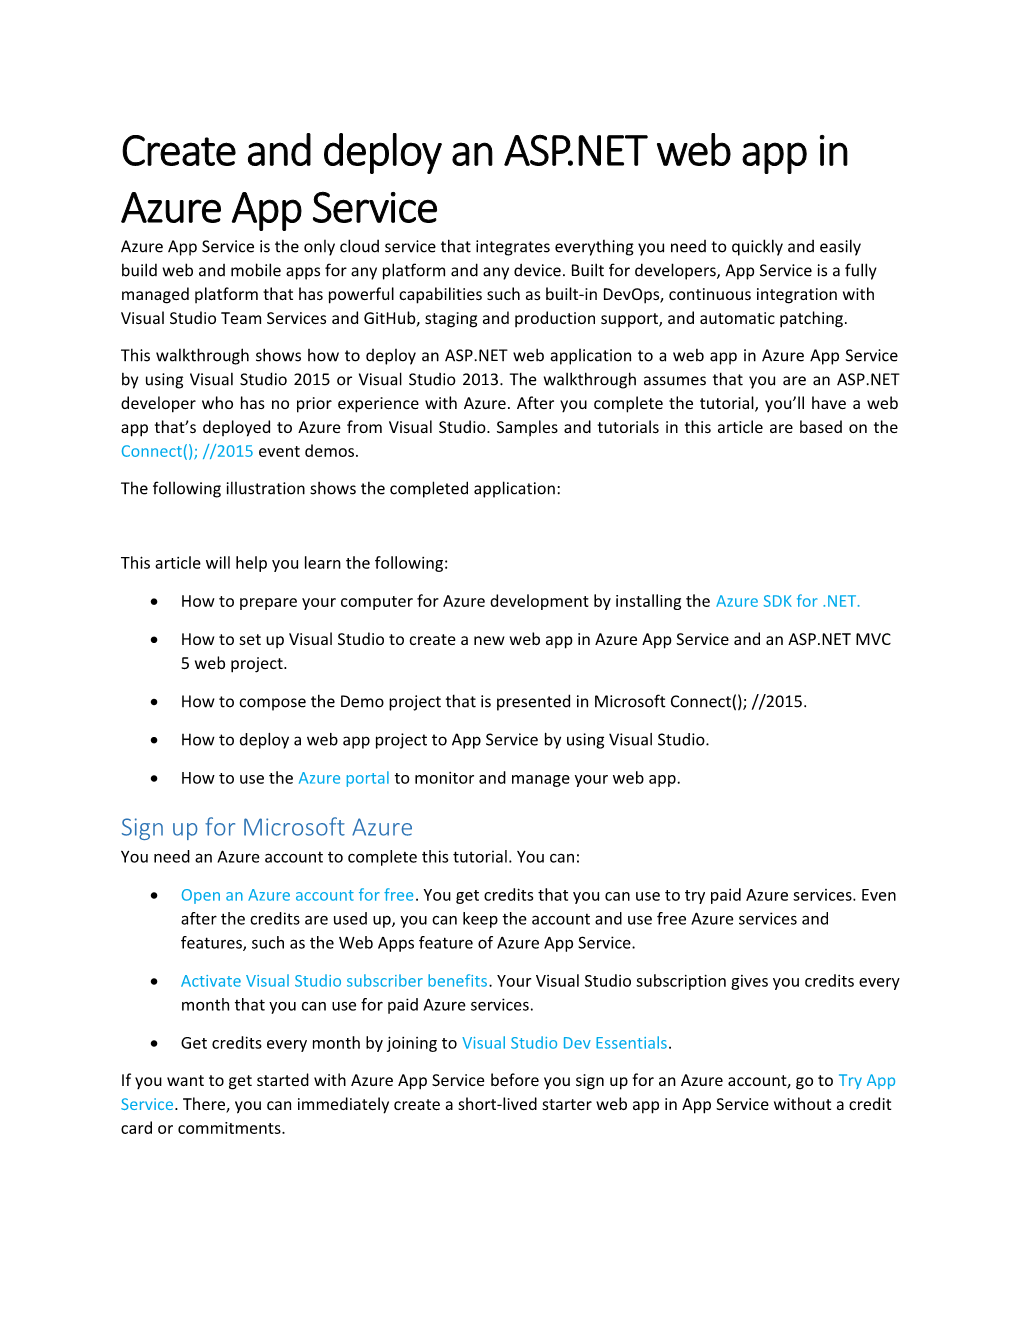 Create and Deploy an ASP.NET Web App in Azure App Service